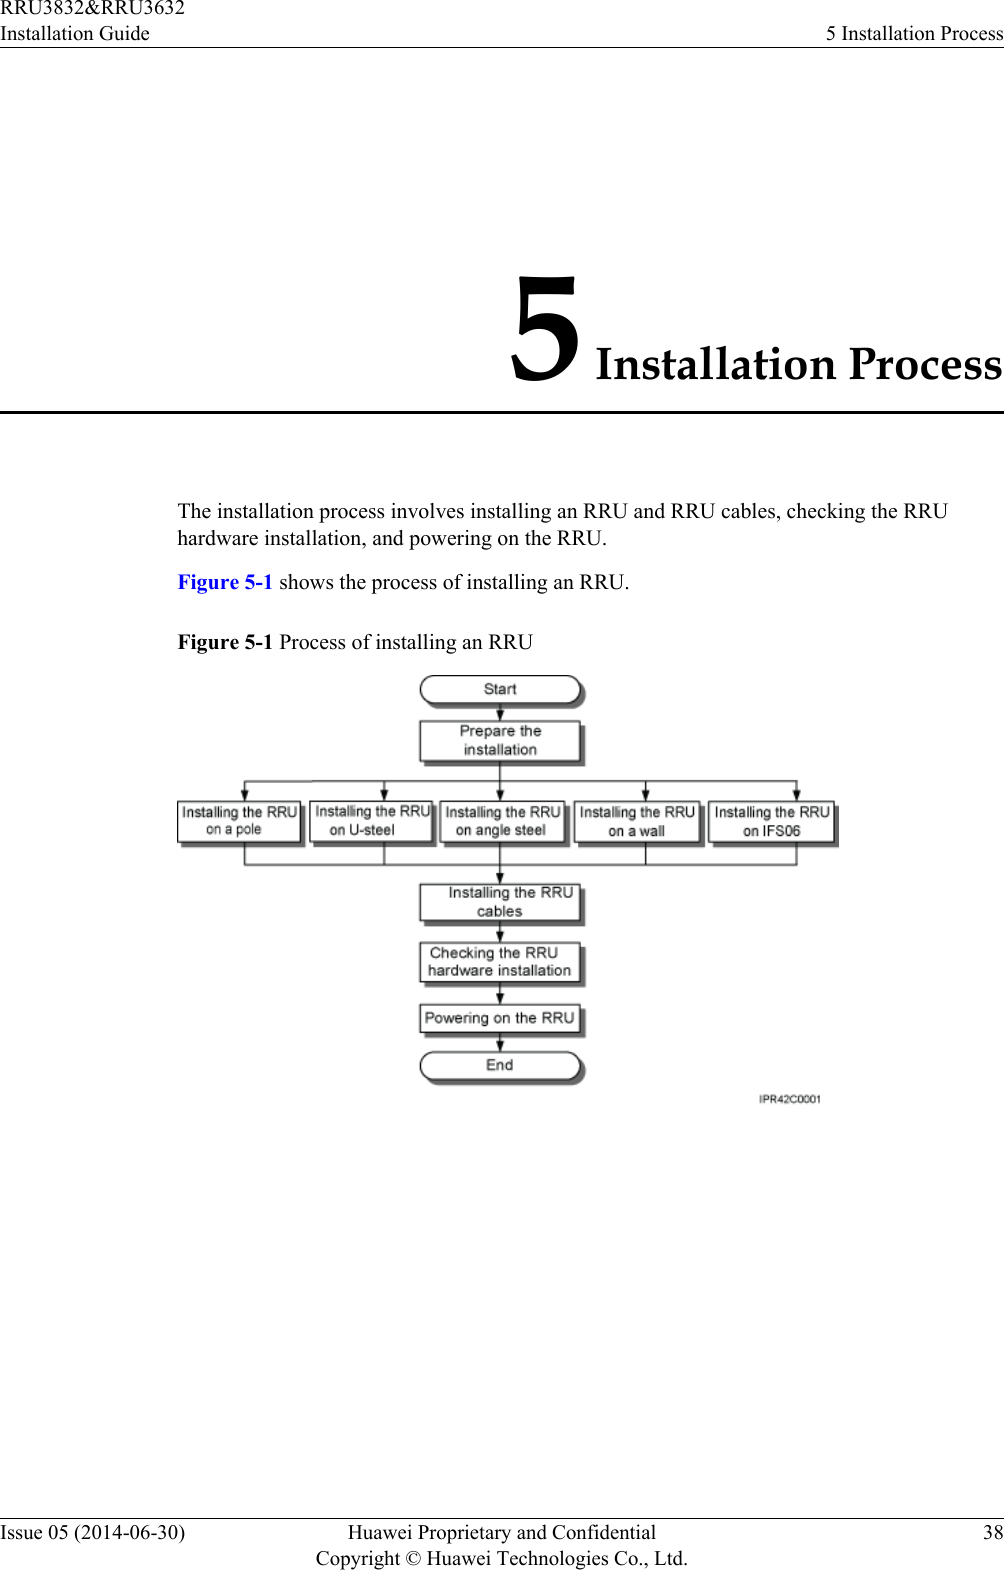 5 Installation ProcessThe installation process involves installing an RRU and RRU cables, checking the RRUhardware installation, and powering on the RRU.Figure 5-1 shows the process of installing an RRU.Figure 5-1 Process of installing an RRURRU3832&amp;RRU3632Installation Guide 5 Installation ProcessIssue 05 (2014-06-30) Huawei Proprietary and ConfidentialCopyright © Huawei Technologies Co., Ltd.38